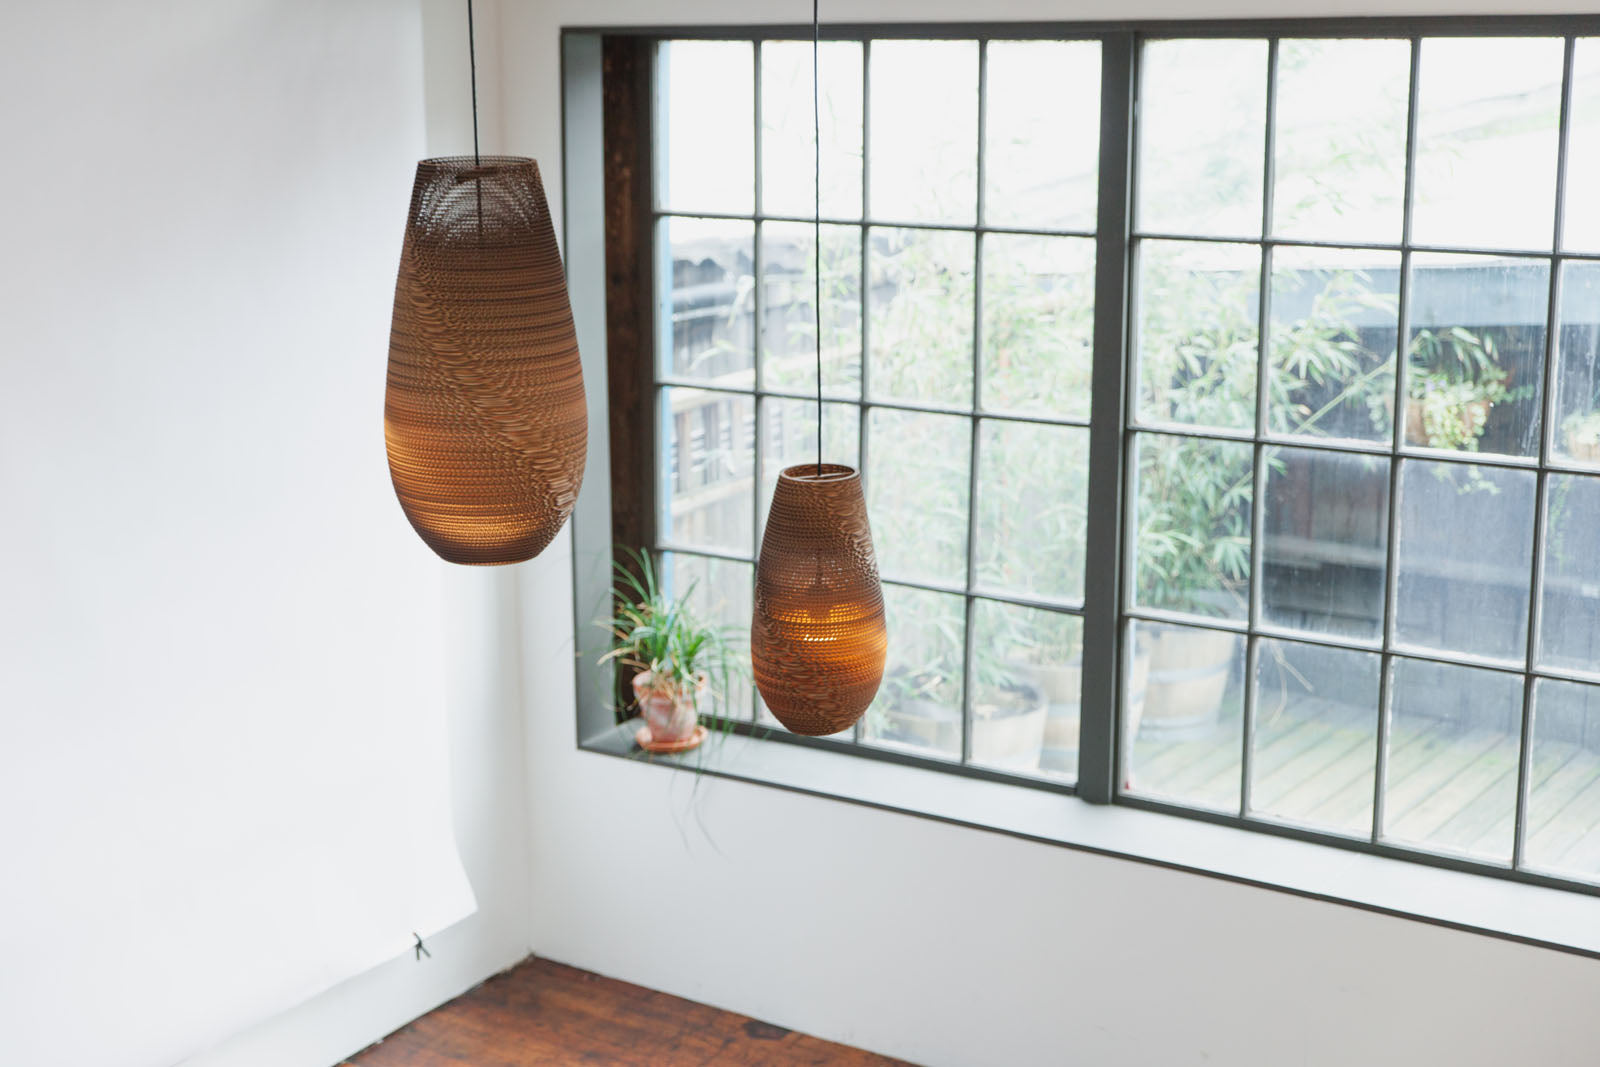 Natural brown recycled Sustainable Pendant Light by Scraplight